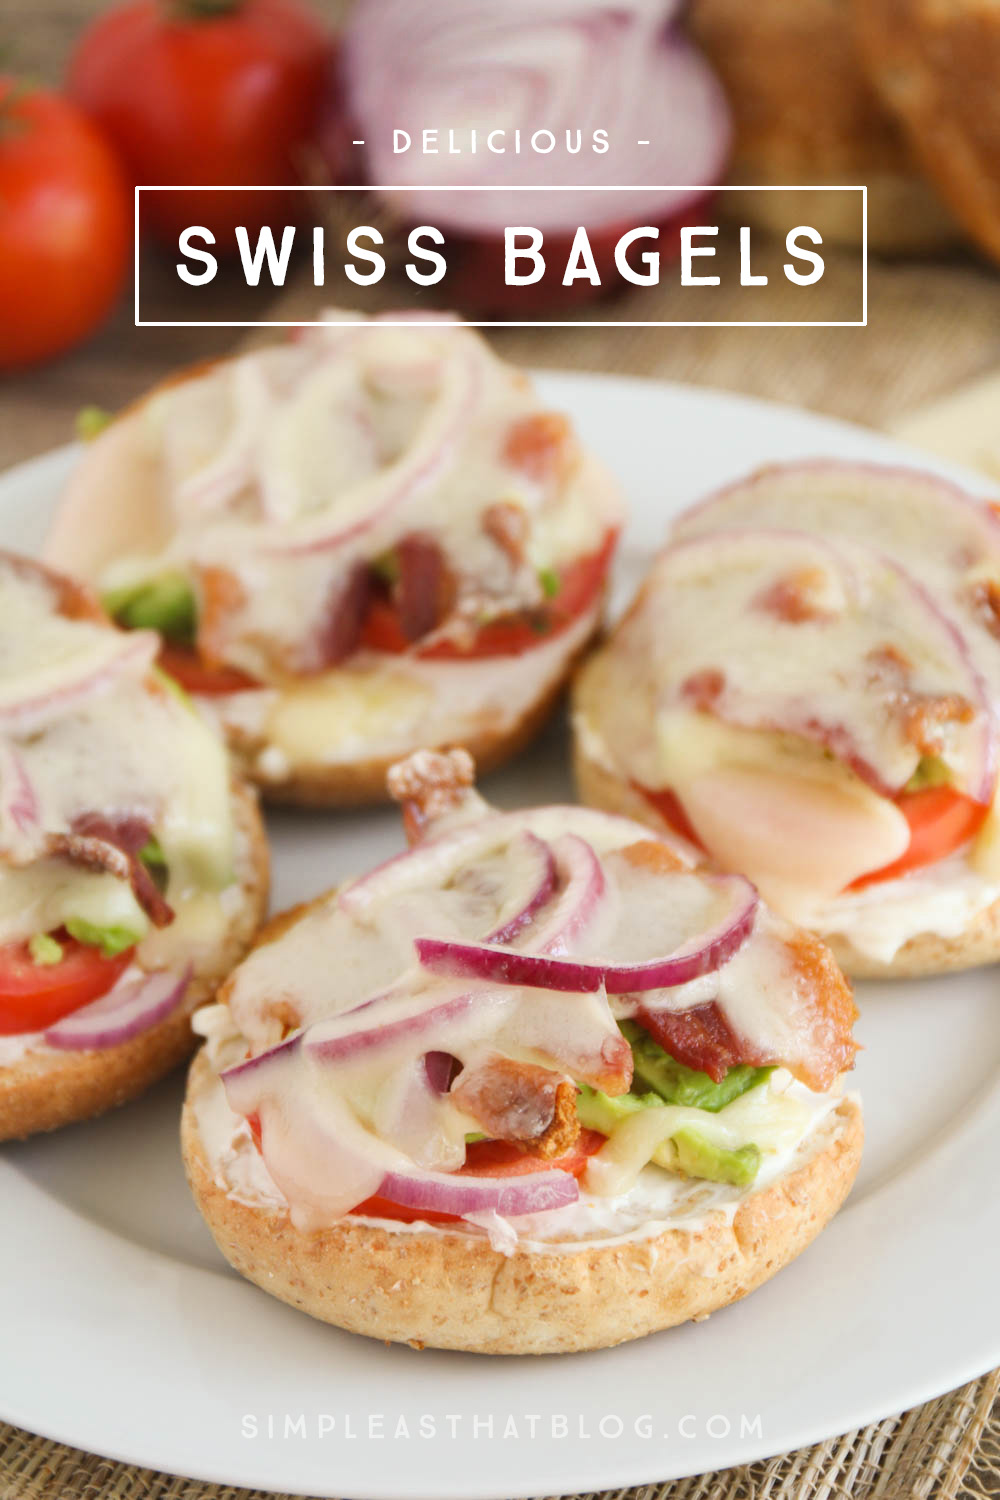 Topped with swiss cheese, avocado, bacon (and more!) these open-face swiss bagels are perfect for breakfast, lunch or snacktime!